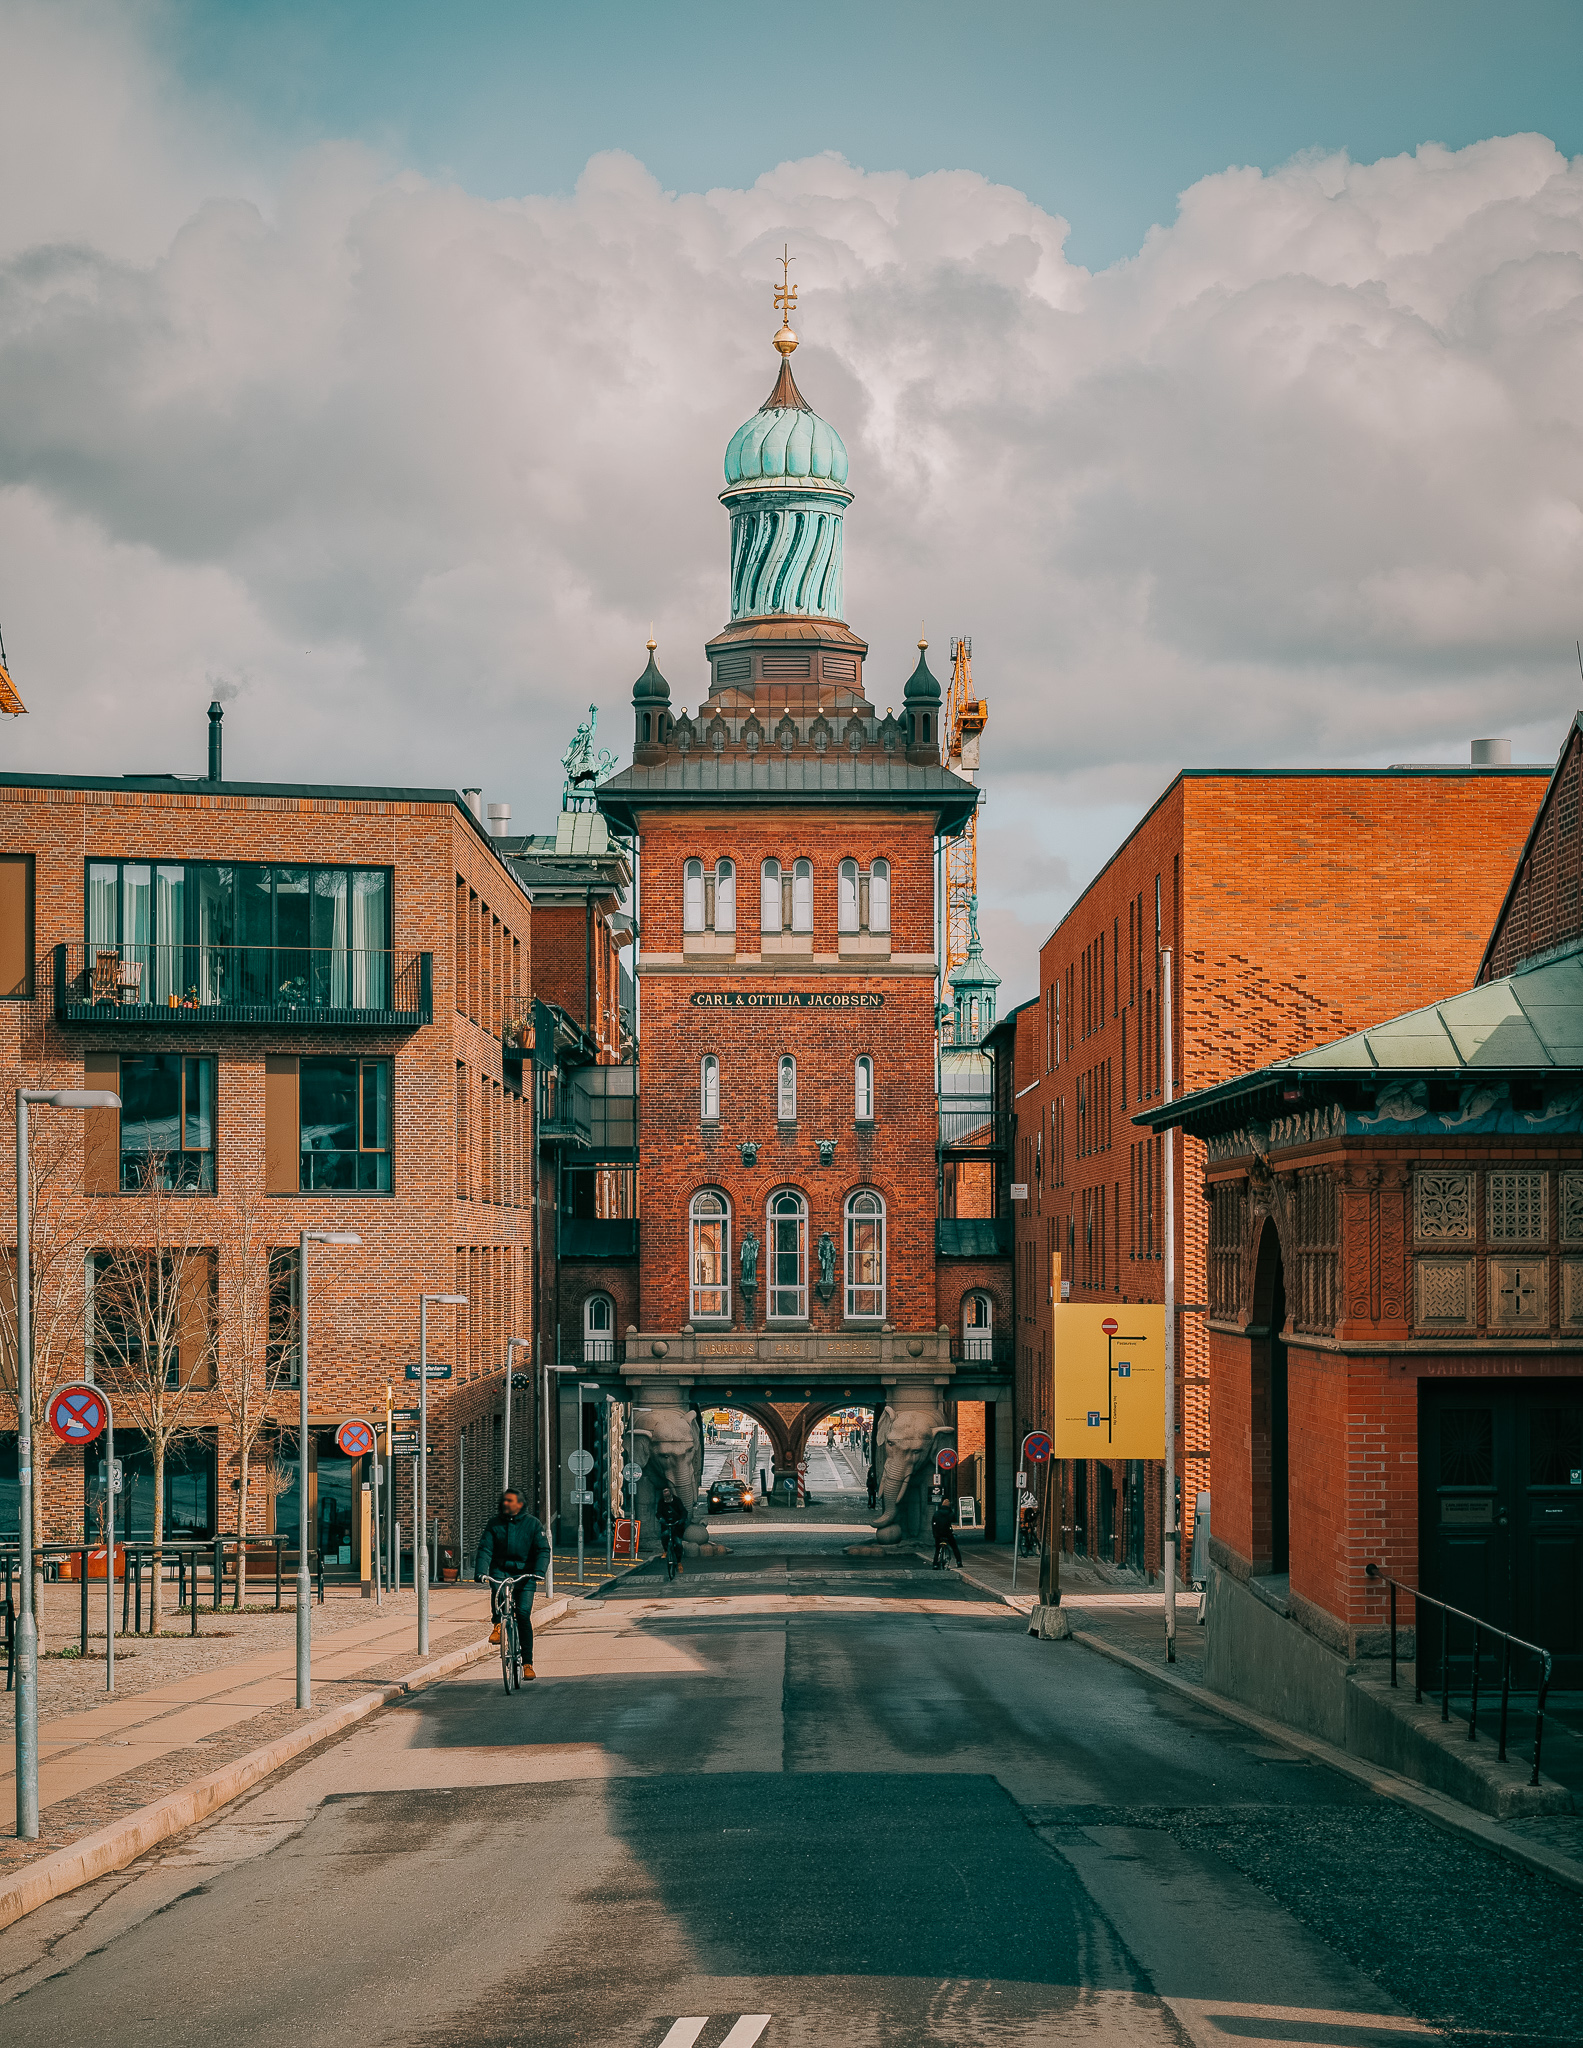 A towered brick building with a spiraled green copper tip, with arches going over a small street in Copenhagen